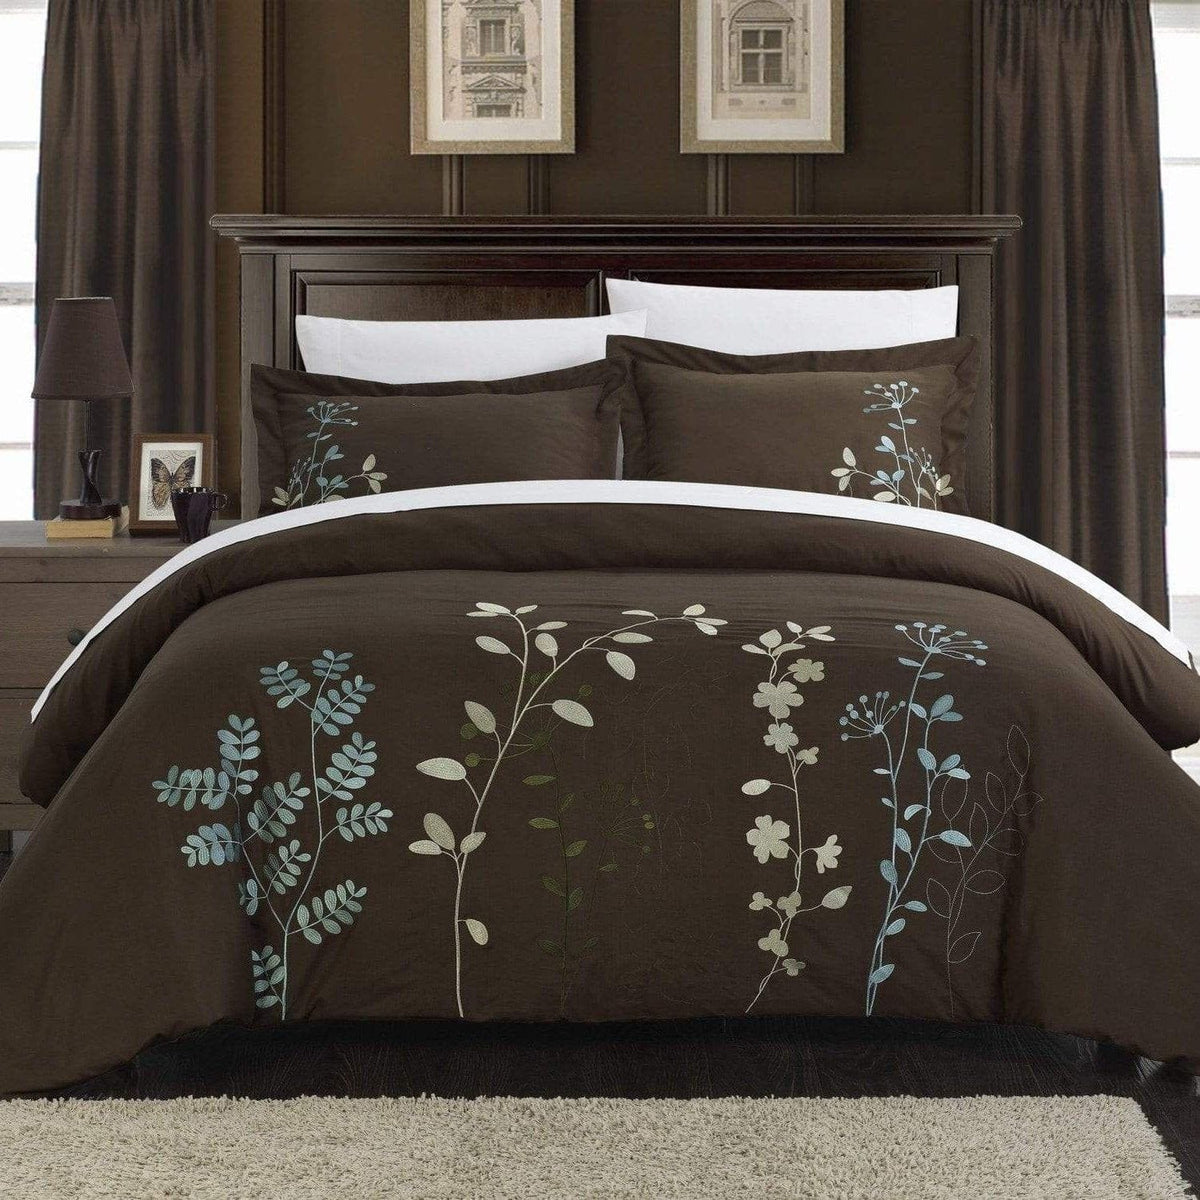 Chic Home Kaylee 7 Piece Floral Duvet Cover Set Brown